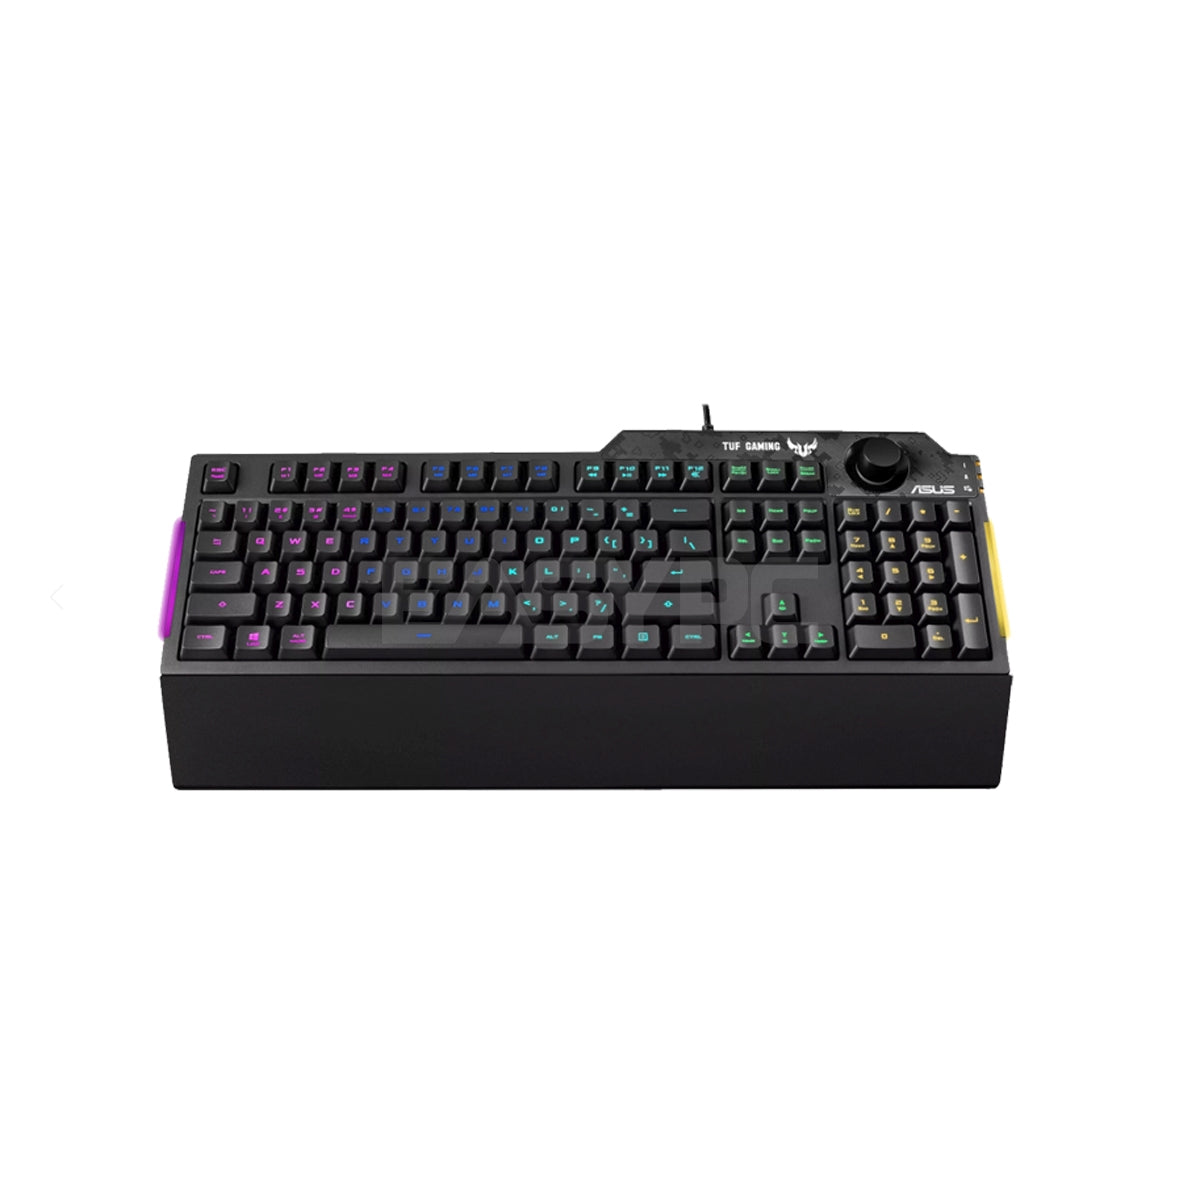 Asus TUF Gaming K1 Dynamic RGB lighting effects Detachable ergonomic wrist rest for extended comfort Gaming Keyboard